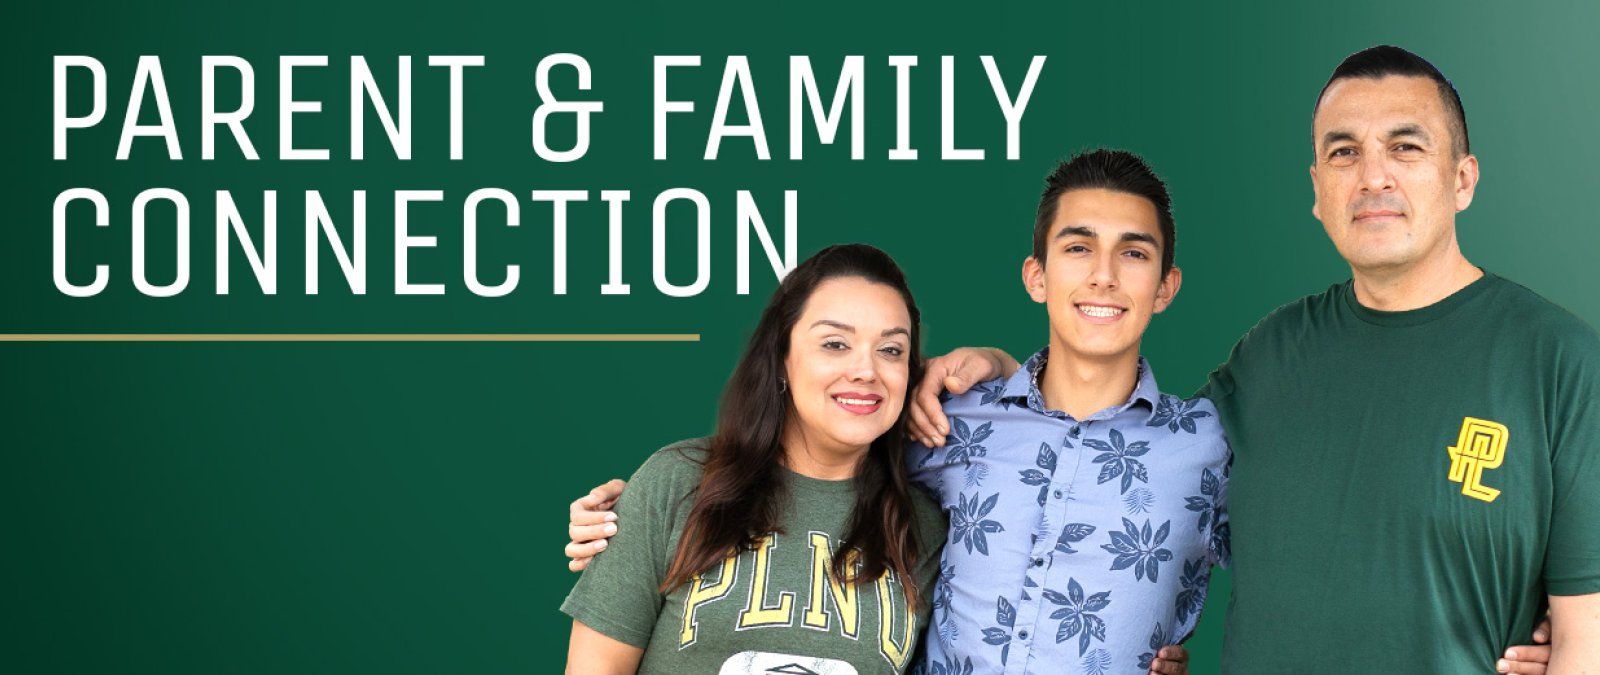 Image of family at PLNU